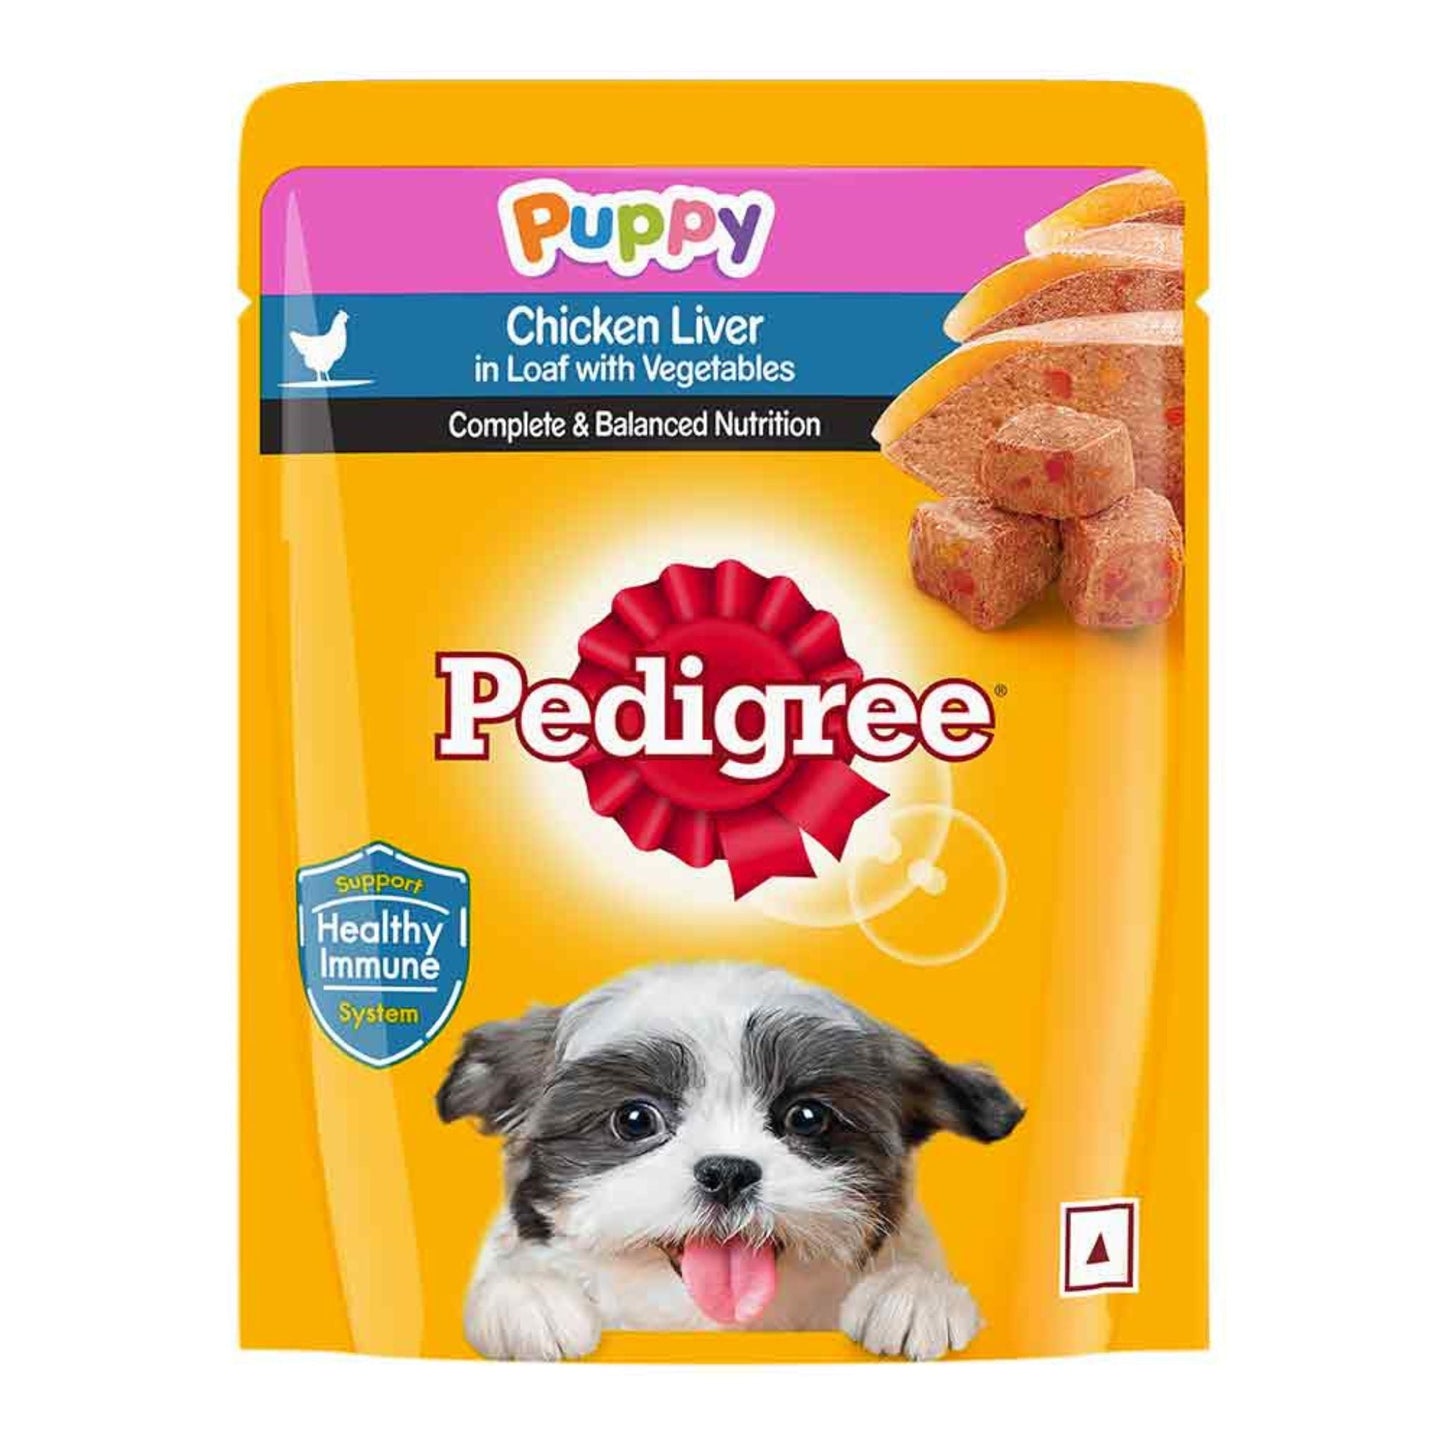 Pedigree Puppy Chicken Liver in Loaf with Vegetables - 70g, Pack of 45